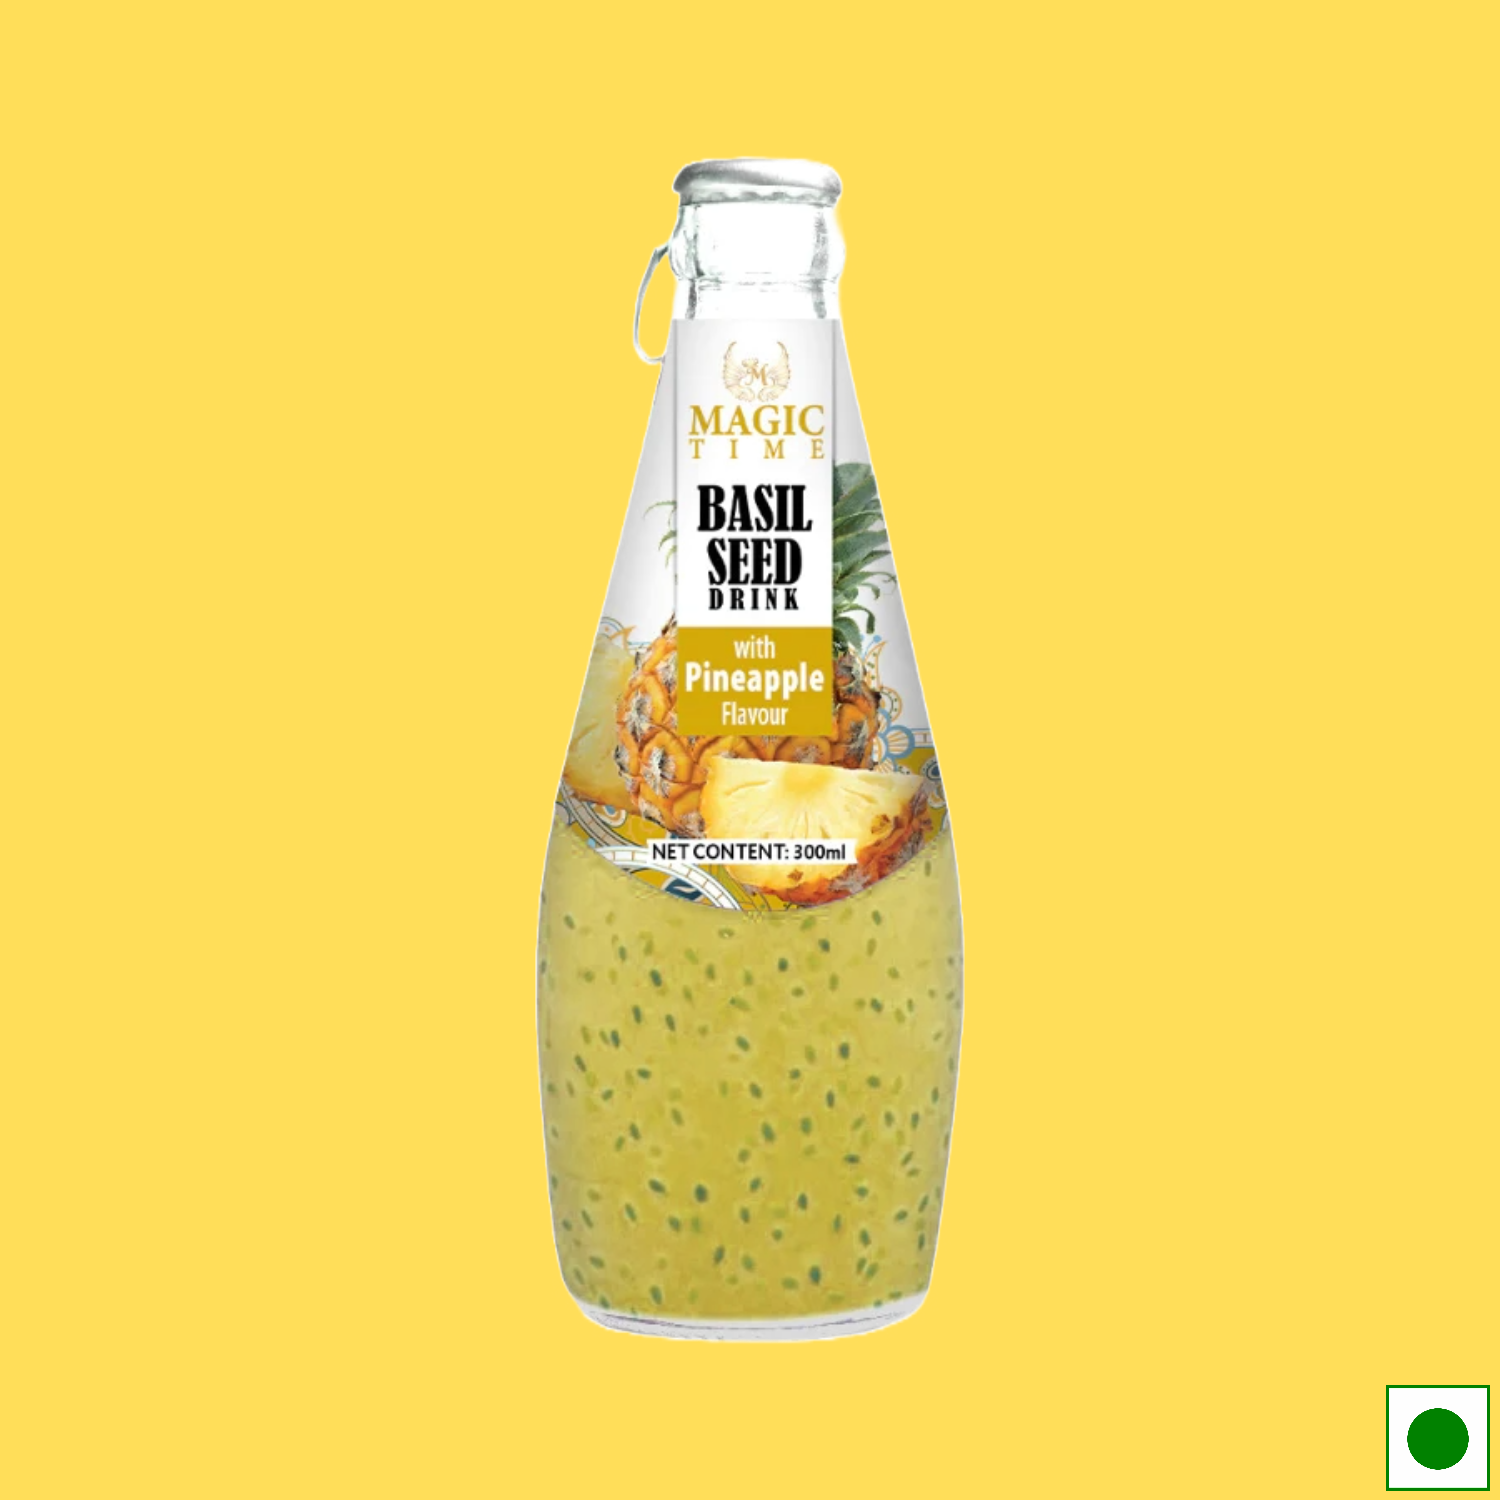 Magic Time Pineapple Flavored Basil Seed Drink, 300ml (Imported)